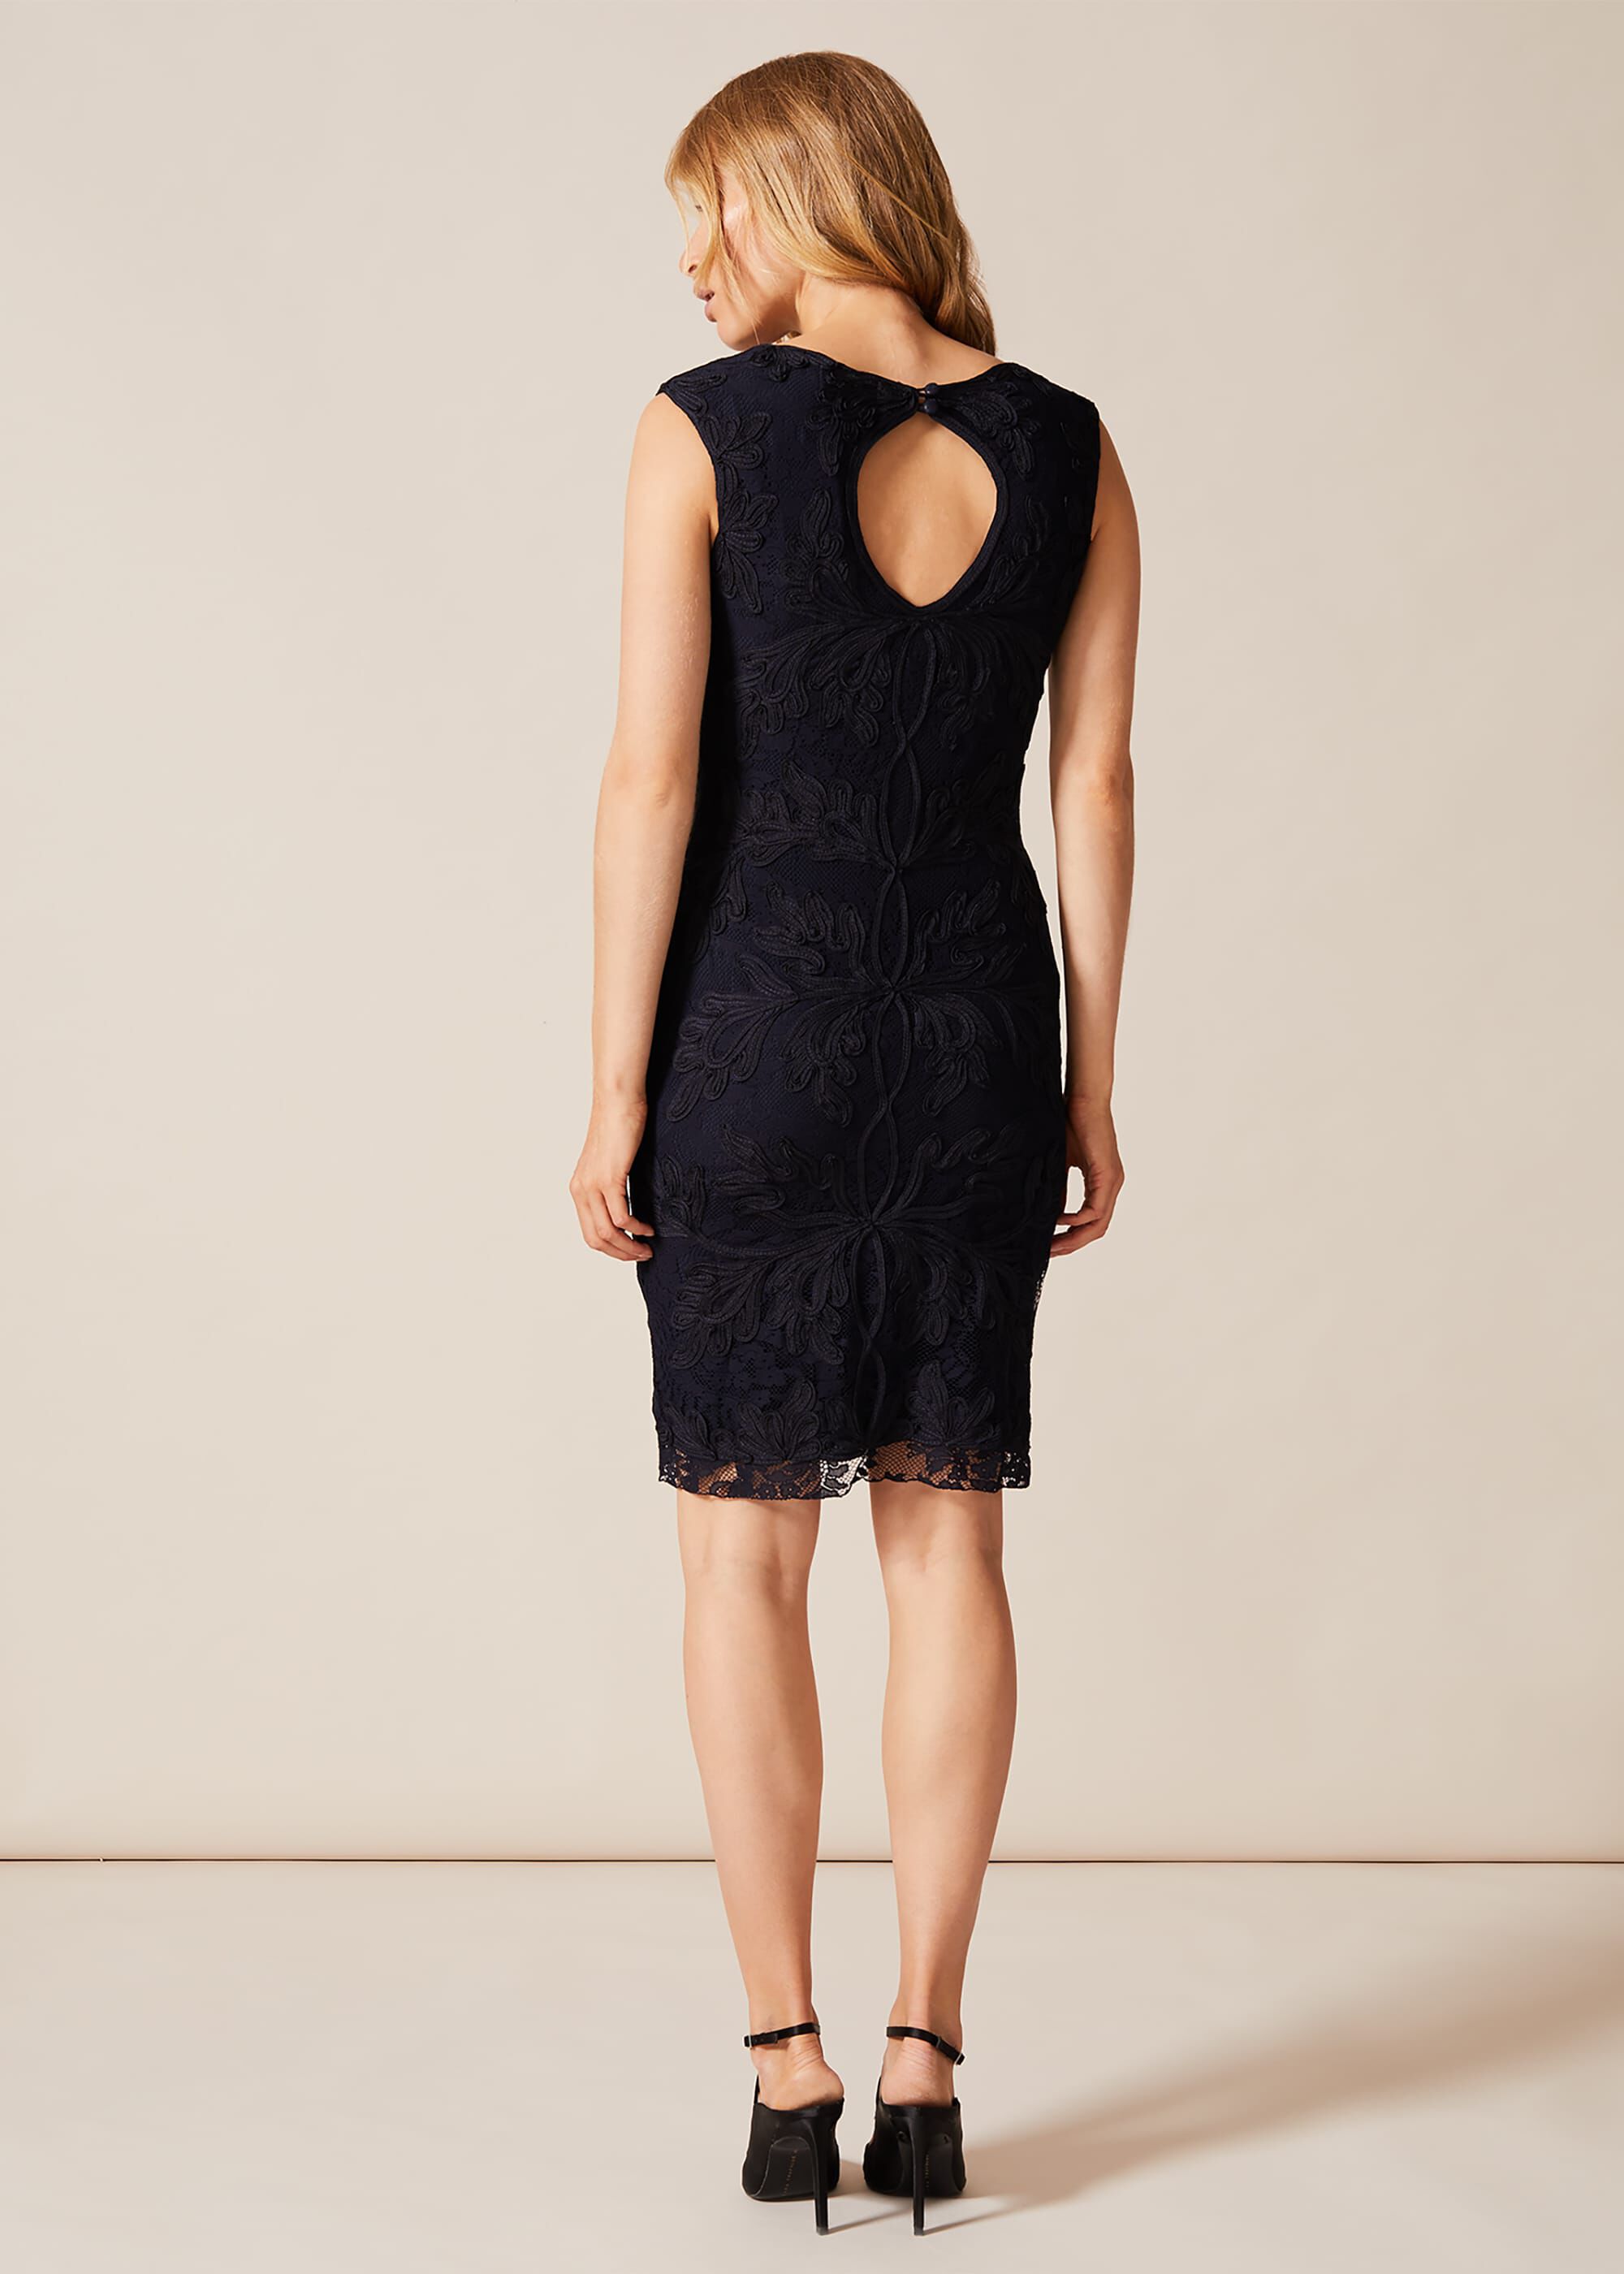 Blue Womens Clothing Dresses Cocktail and party dresses Phase Eight s Paige Short Tapework Lace Dress in Navy/Ivory 